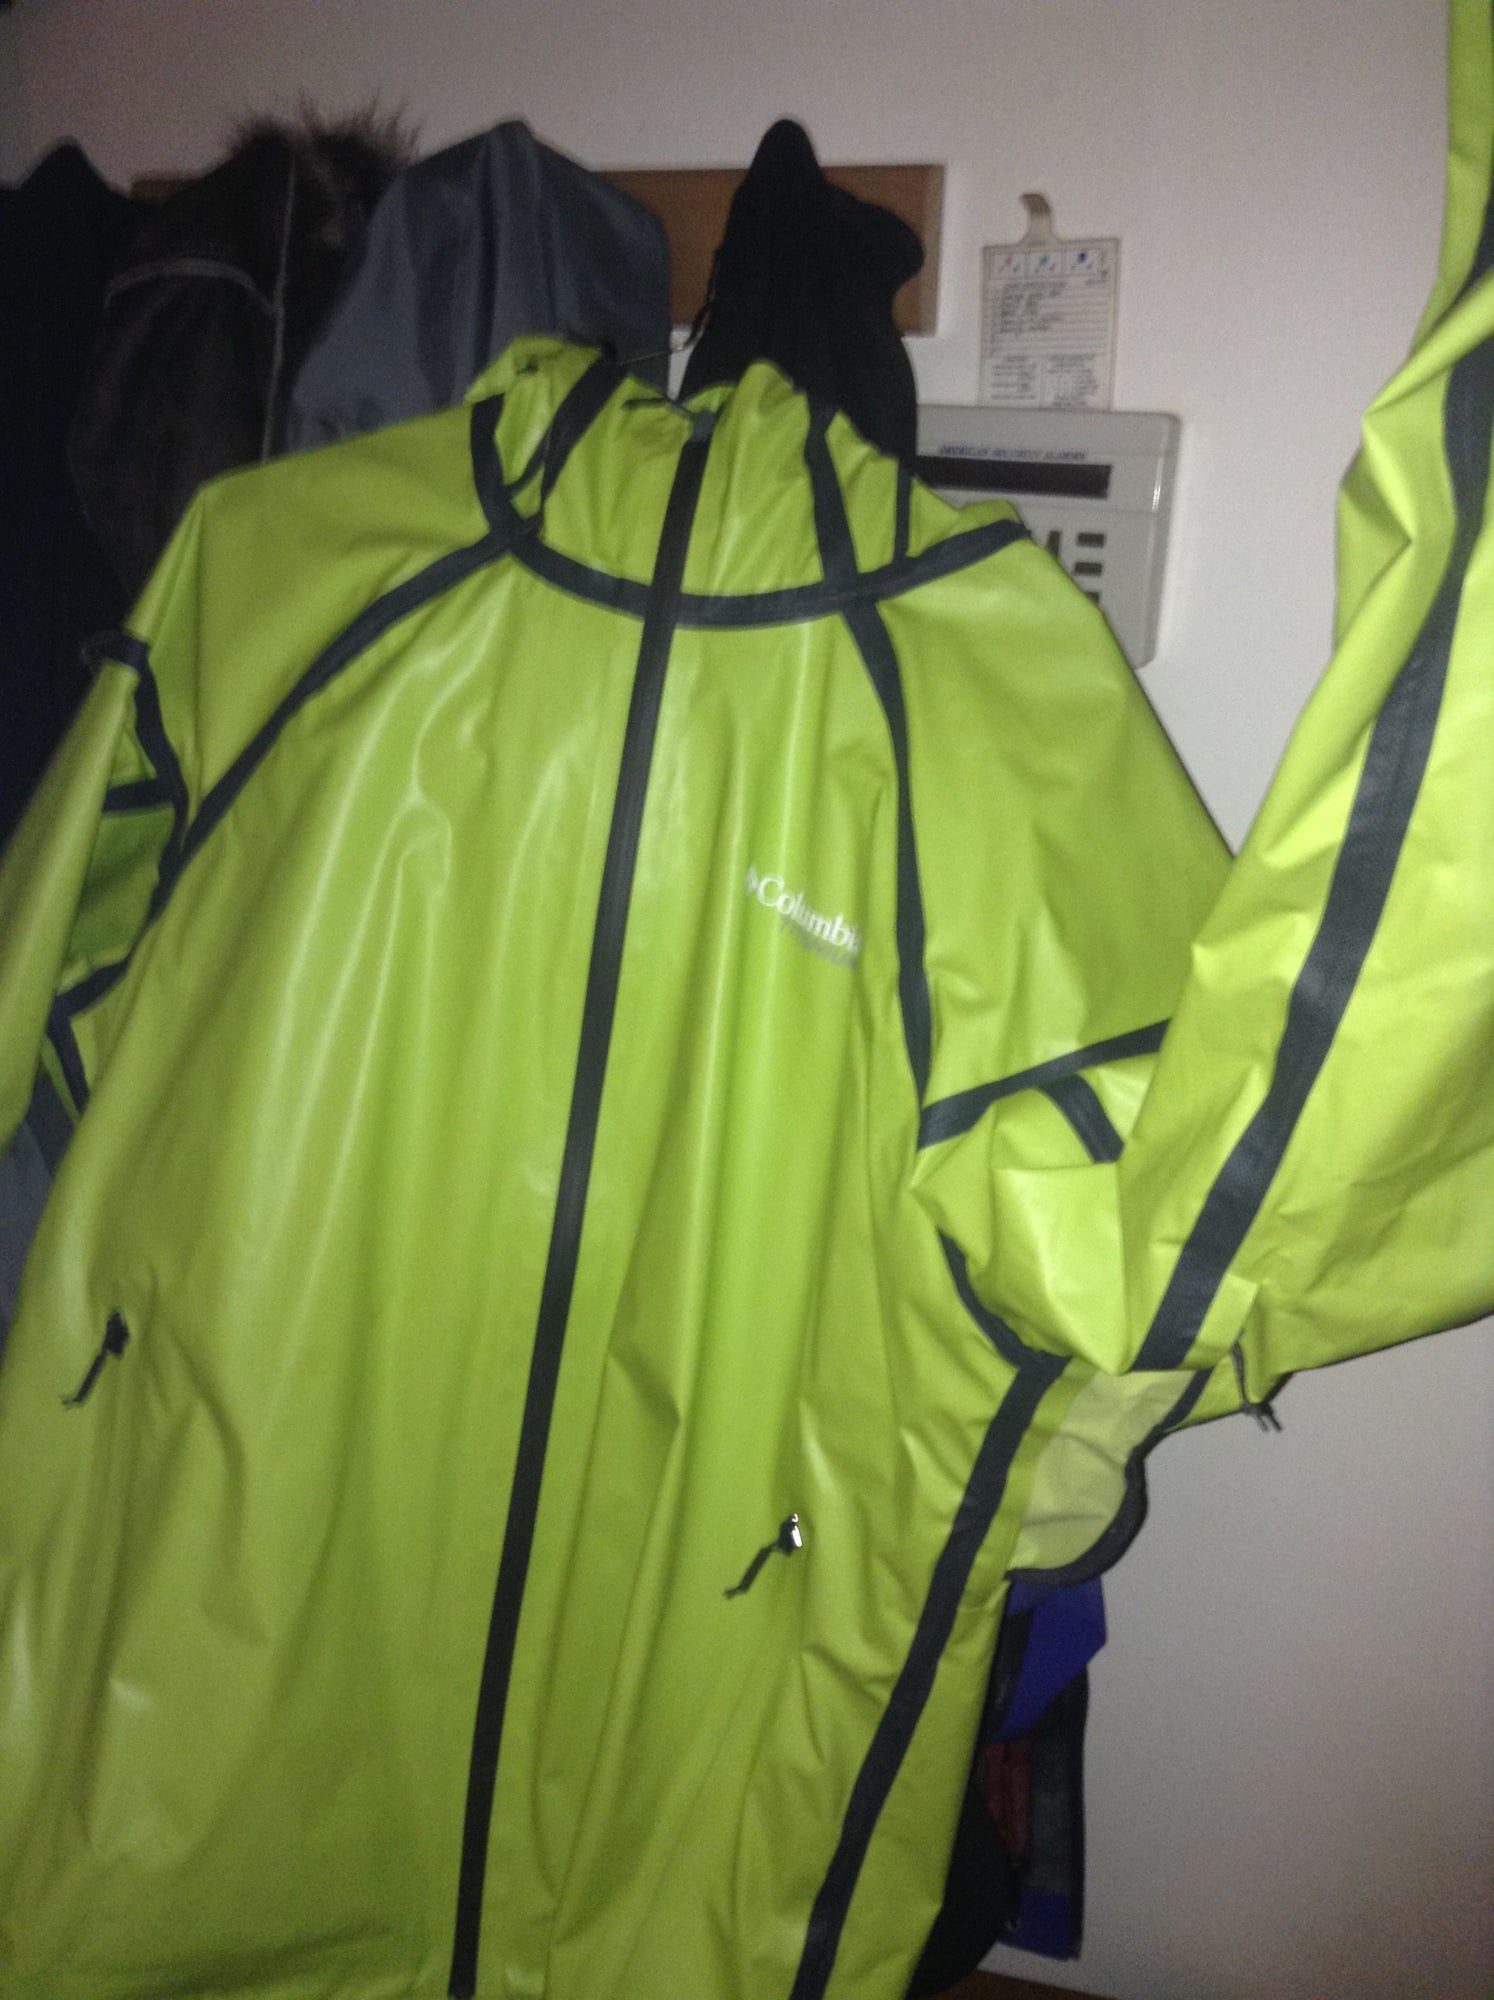 Light weight rain gear advice - The Hull Truth - Boating and Fishing Forum